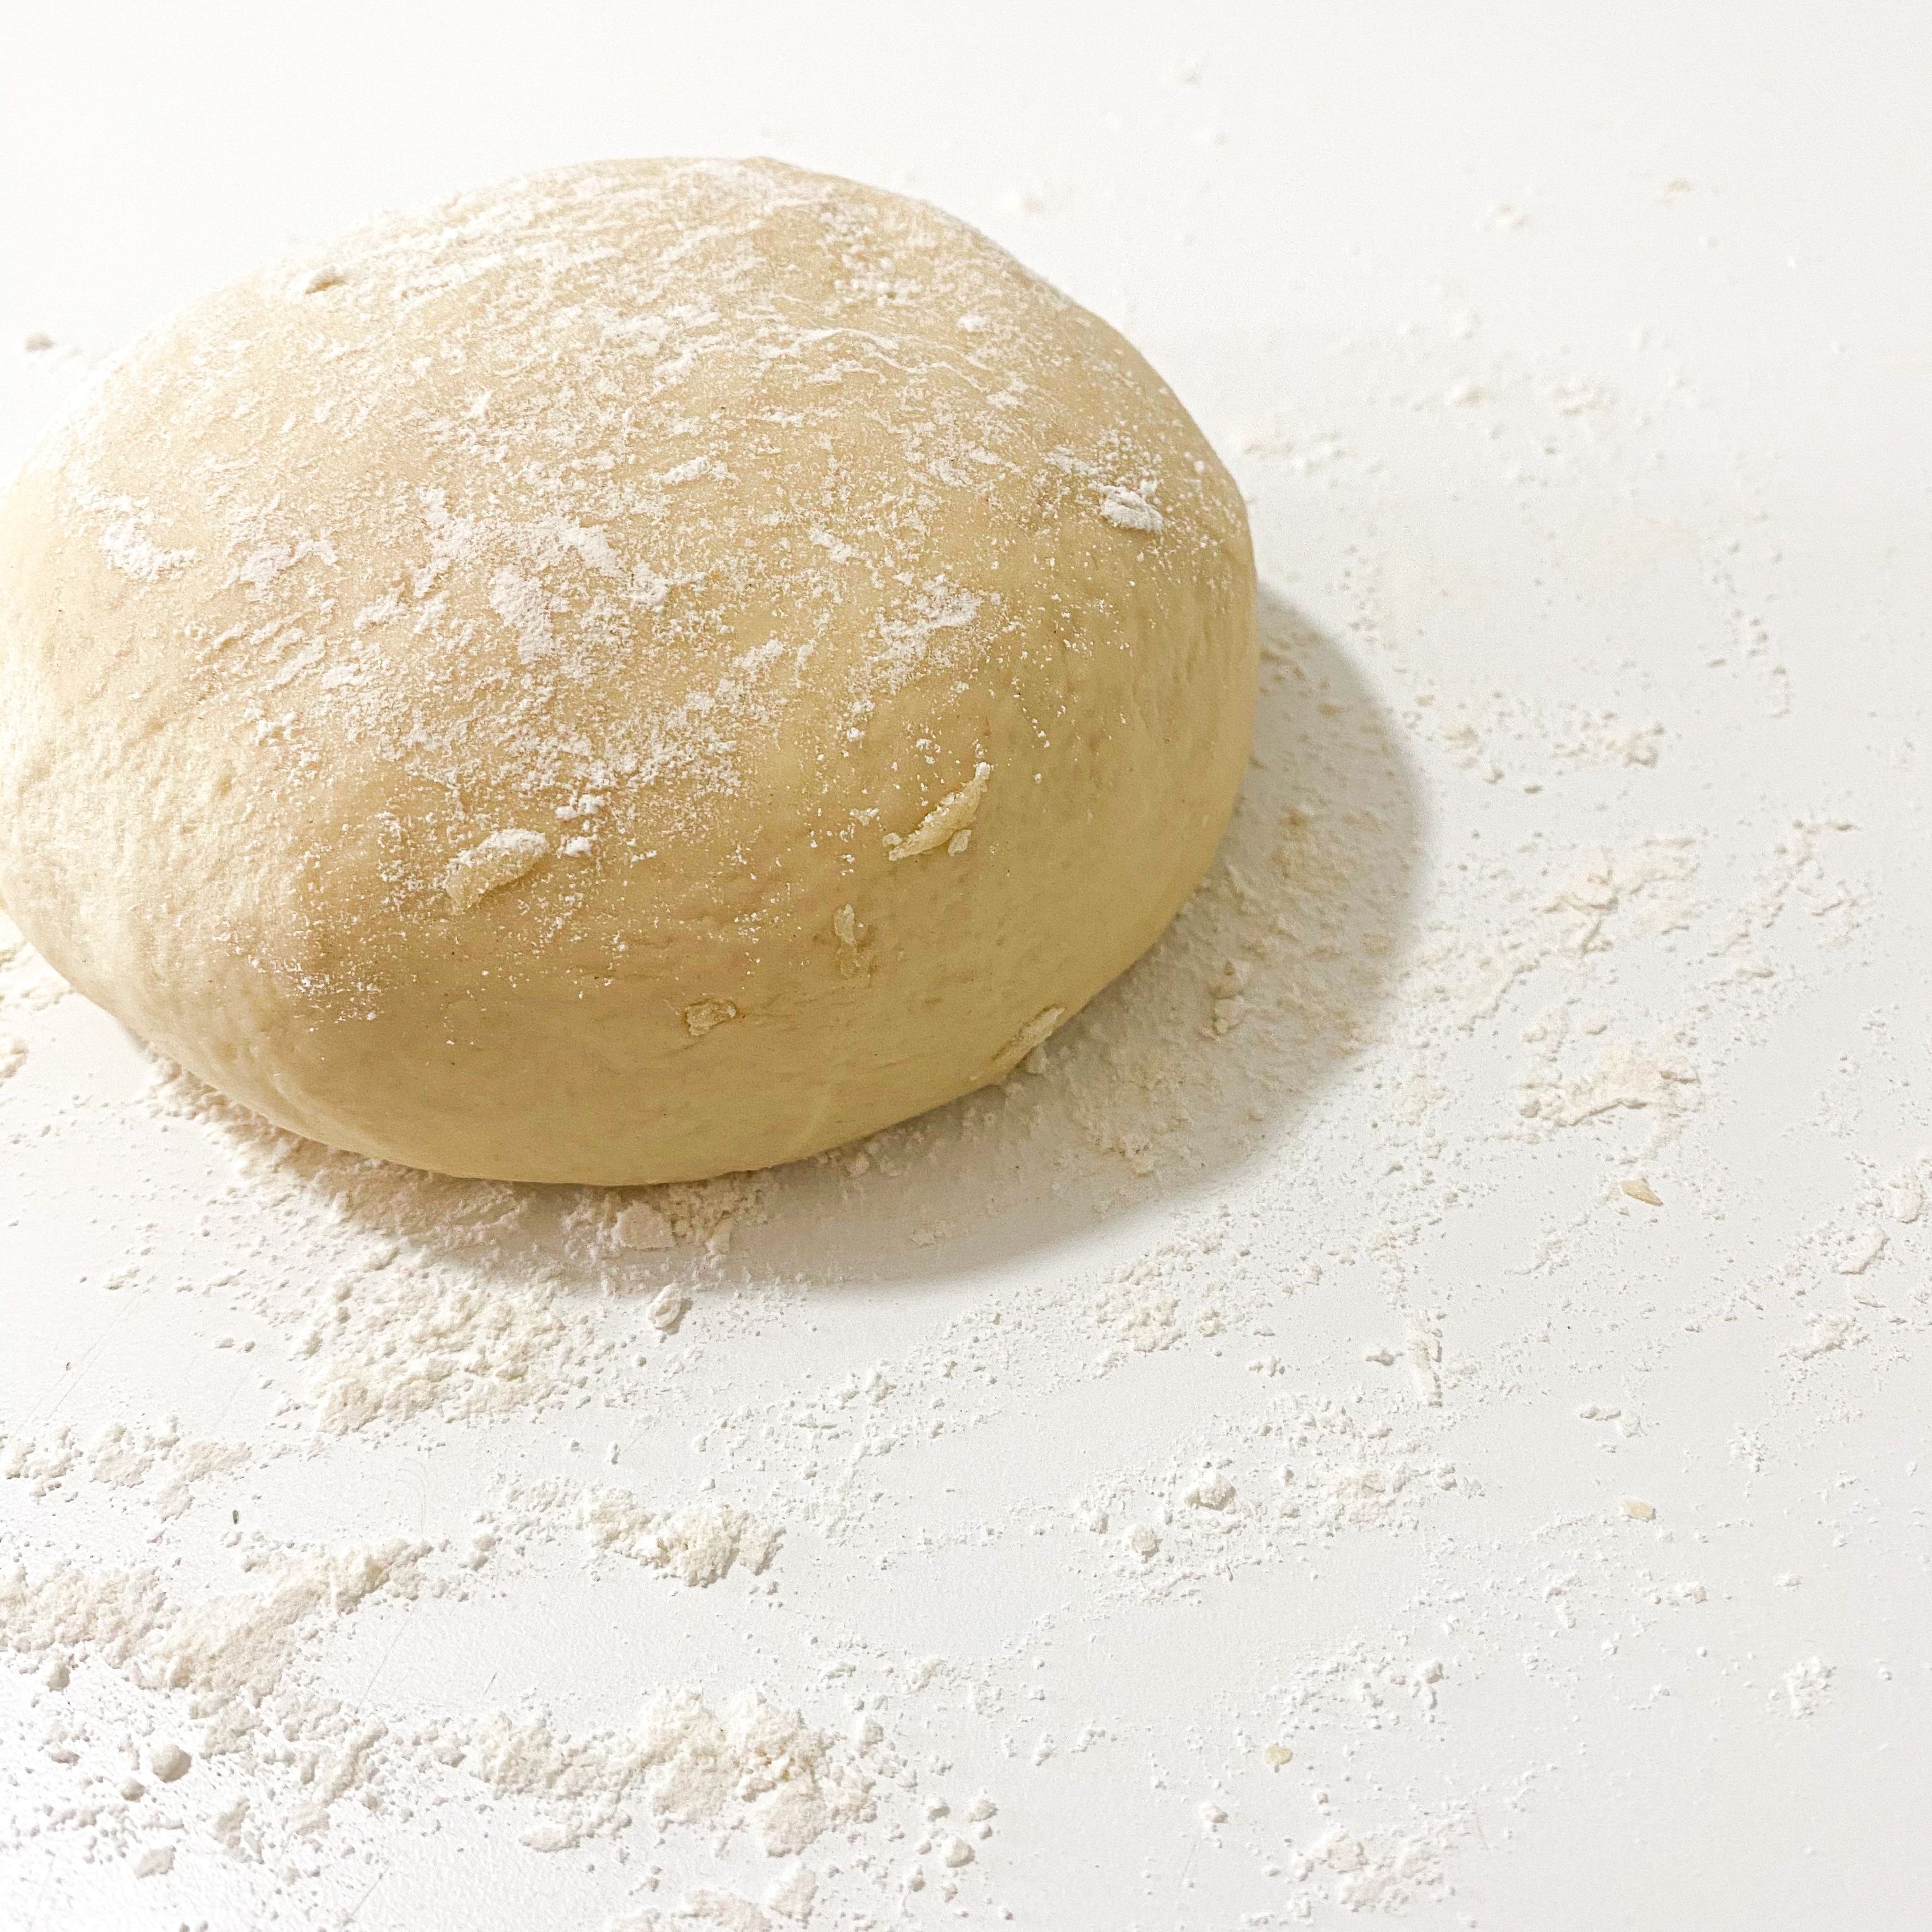 Add enough flour to make a soft dough. Knead a few times on a floured counter until smooth. Place dough in a greased bowl. Cover and let rise in a warm place until doubled.